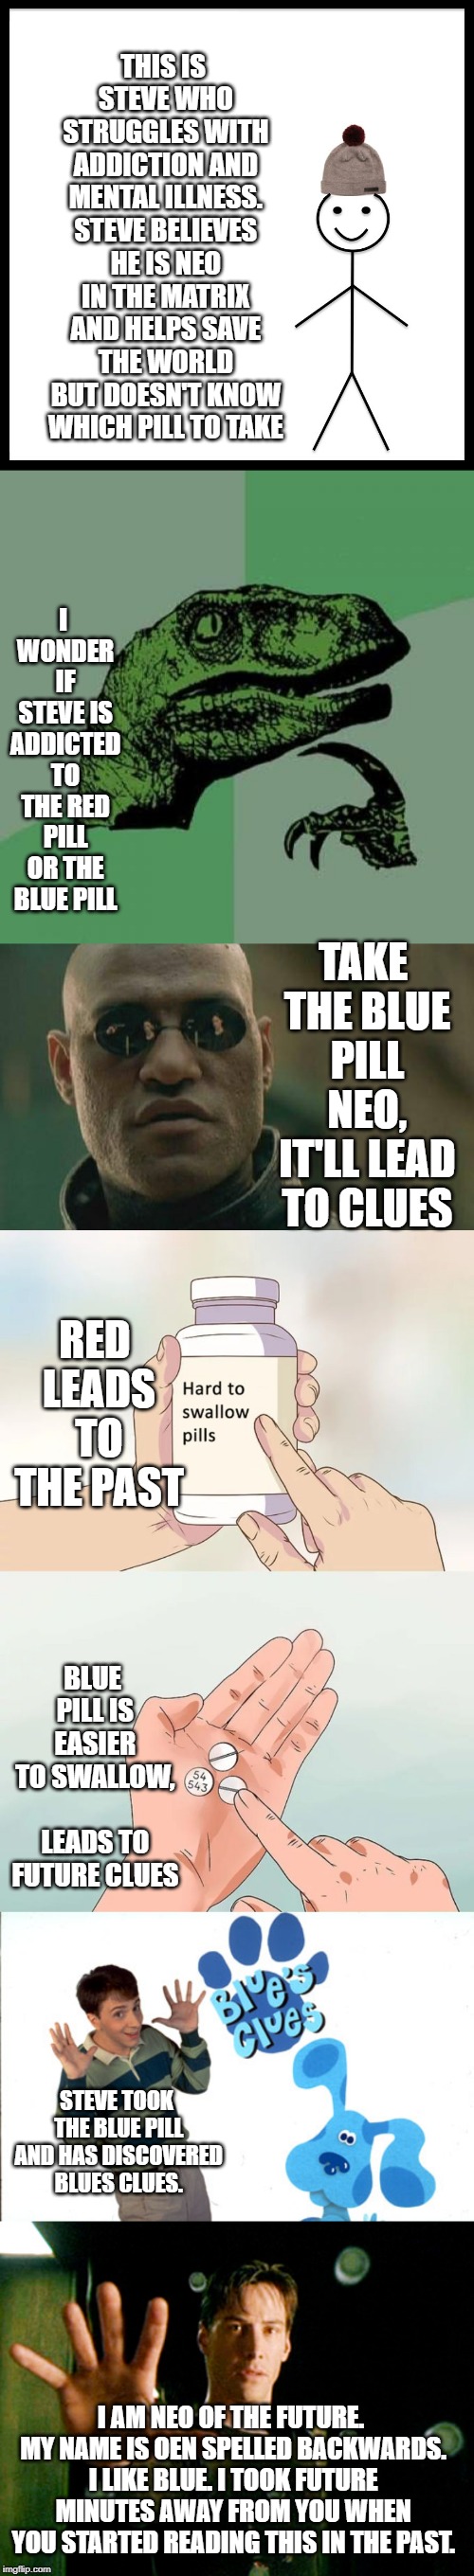 THIS IS STEVE WHO STRUGGLES WITH ADDICTION AND MENTAL ILLNESS. STEVE BELIEVES HE IS NEO IN THE MATRIX AND HELPS SAVE THE WORLD BUT DOESN'T KNOW WHICH PILL TO TAKE; I WONDER IF STEVE IS ADDICTED TO THE RED PILL OR THE BLUE PILL; TAKE THE BLUE PILL NEO, IT'LL LEAD TO CLUES; RED LEADS TO THE PAST; BLUE PILL IS EASIER TO SWALLOW, LEADS TO FUTURE CLUES; STEVE TOOK THE BLUE PILL AND HAS DISCOVERED BLUES CLUES. I AM NEO OF THE FUTURE. MY NAME IS OEN SPELLED BACKWARDS. I LIKE BLUE. I TOOK FUTURE MINUTES AWAY FROM YOU WHEN YOU STARTED READING THIS IN THE PAST. | image tagged in memes,philosoraptor,matrix morpheus,be like bill,hard to swallow pills | made w/ Imgflip meme maker